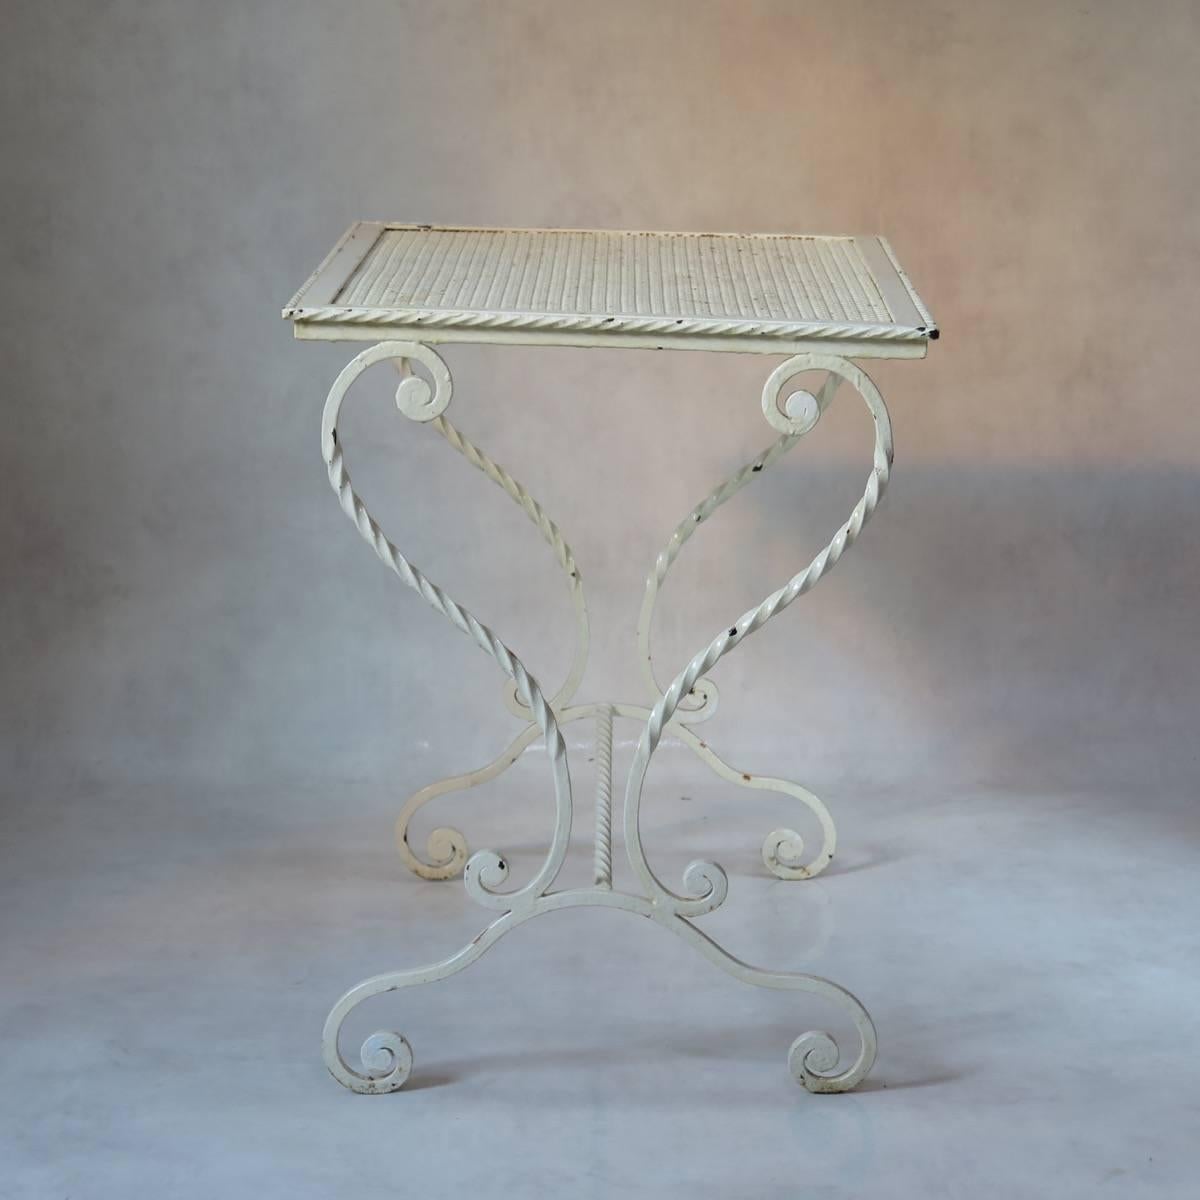 Painted French 1950s Wrought Iron Garden Table For Sale